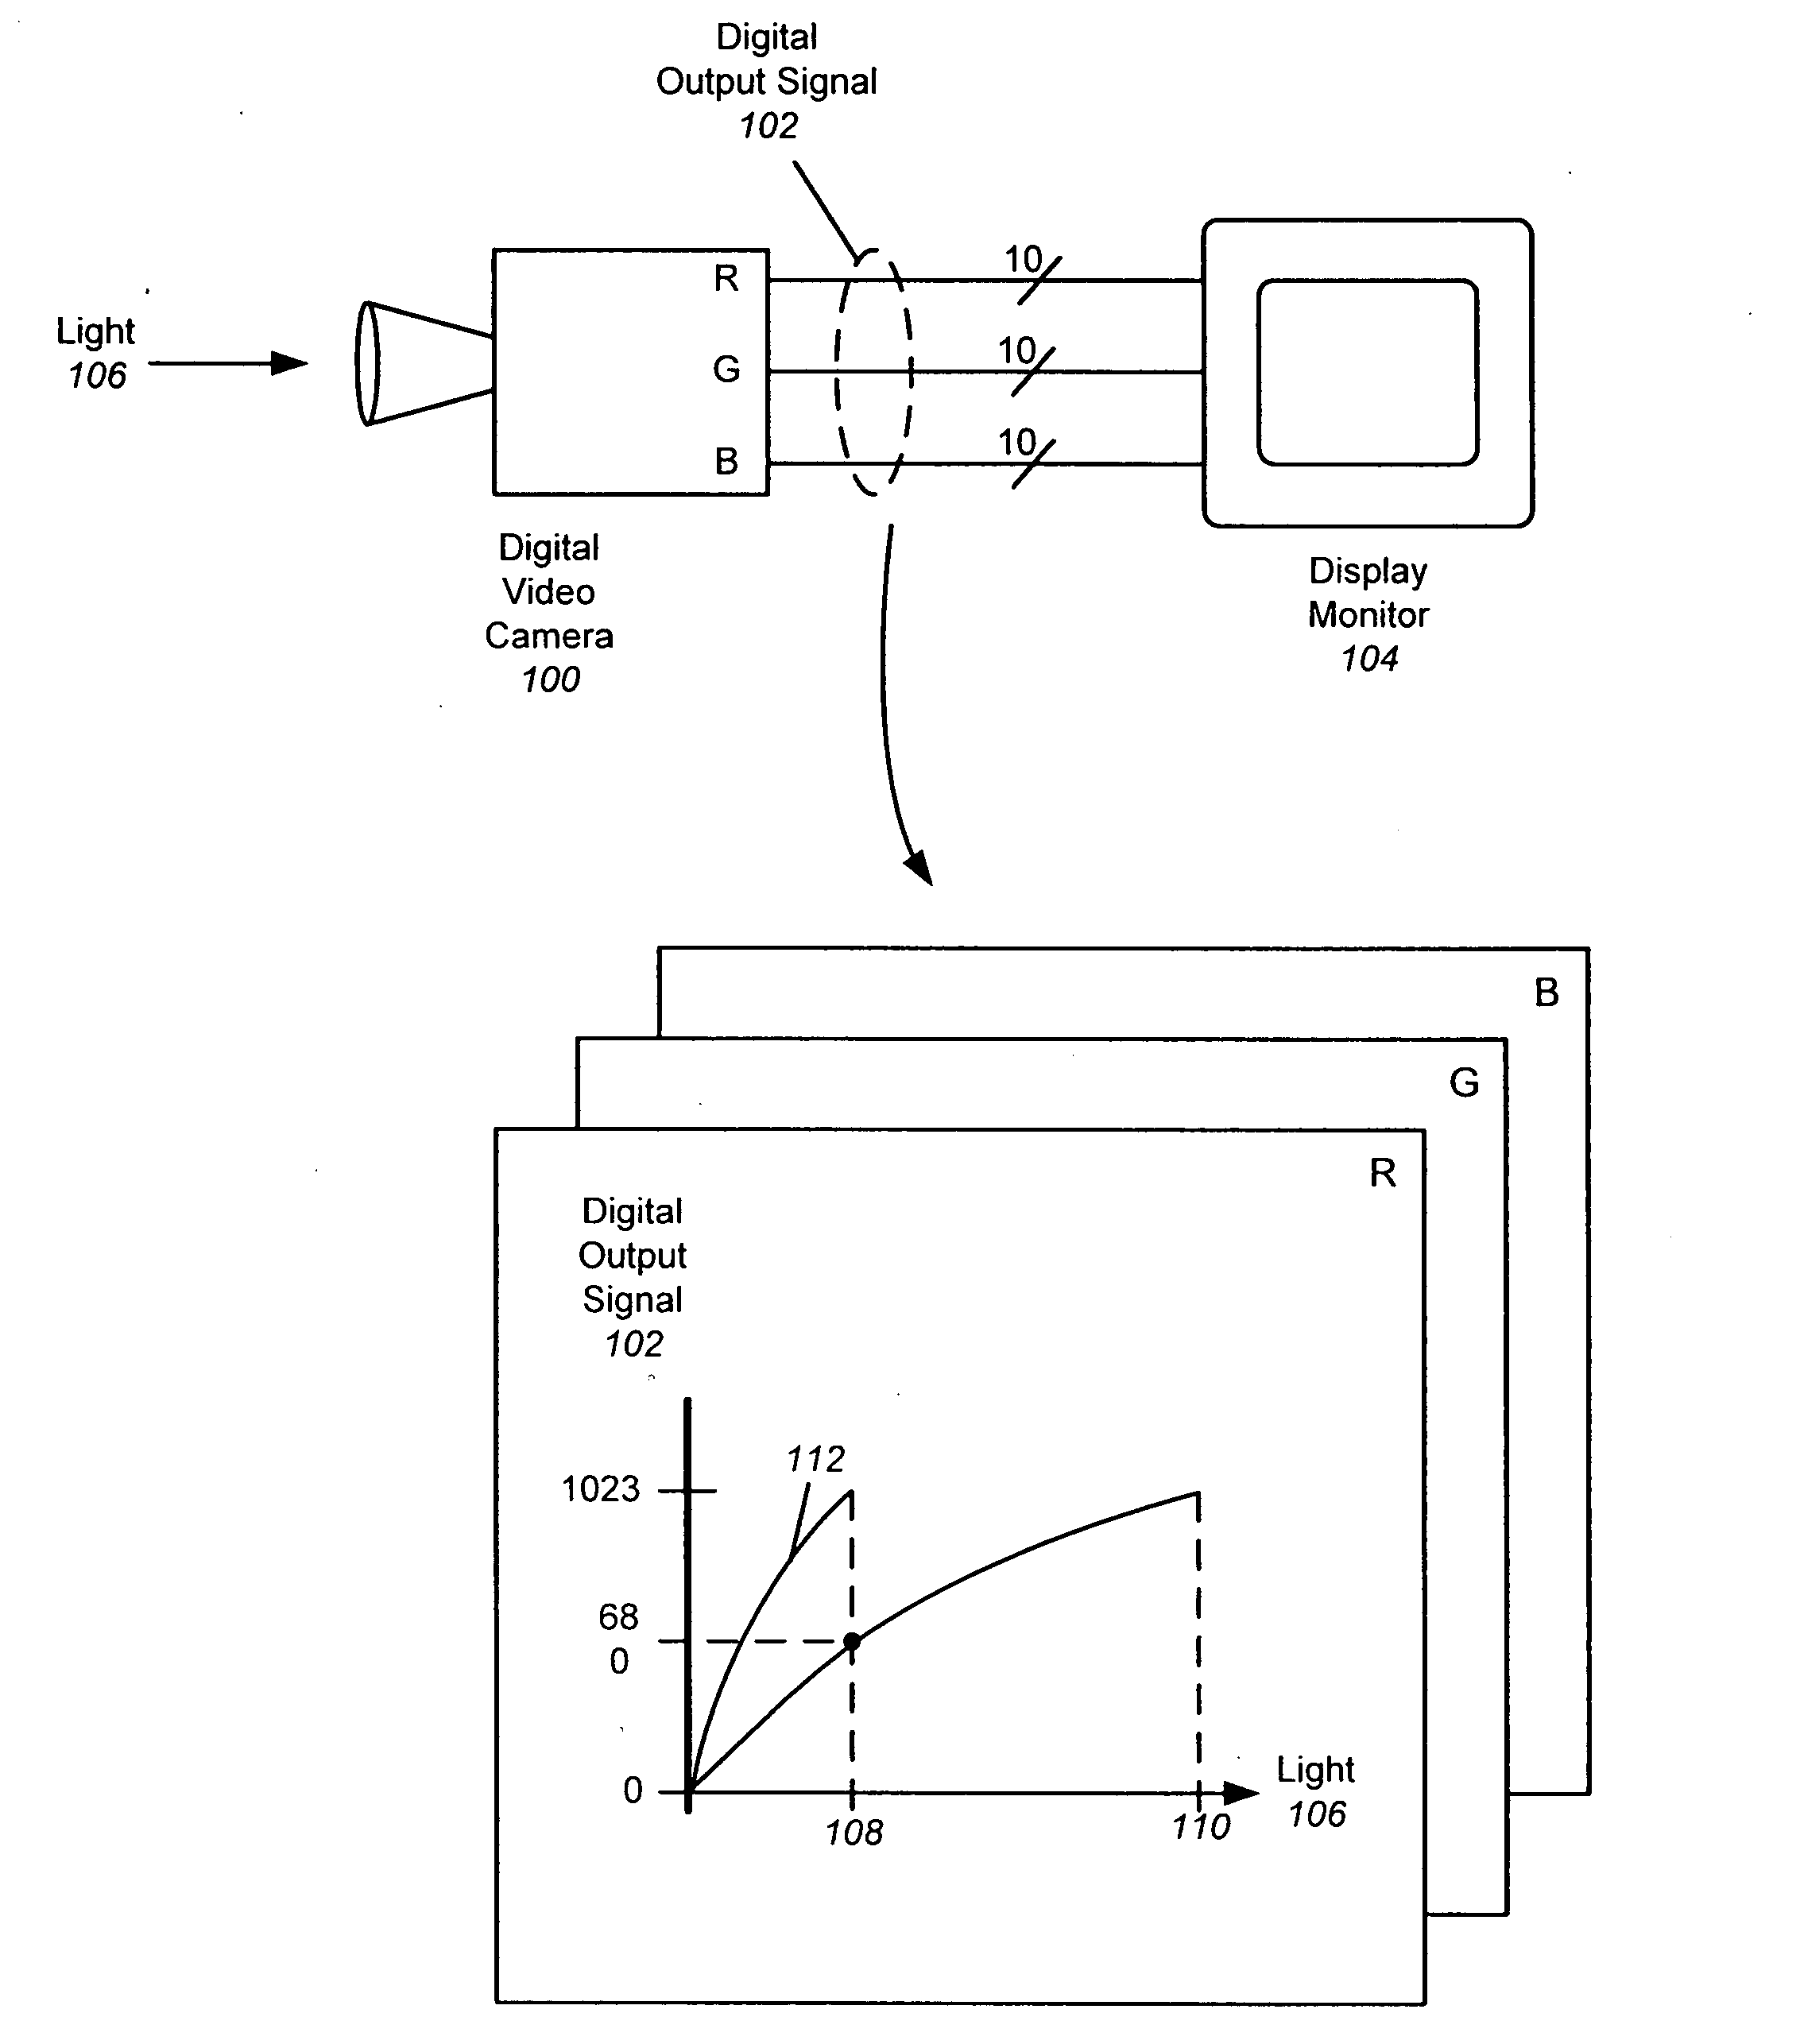 Generation of 3D look-up tables for image processing devices